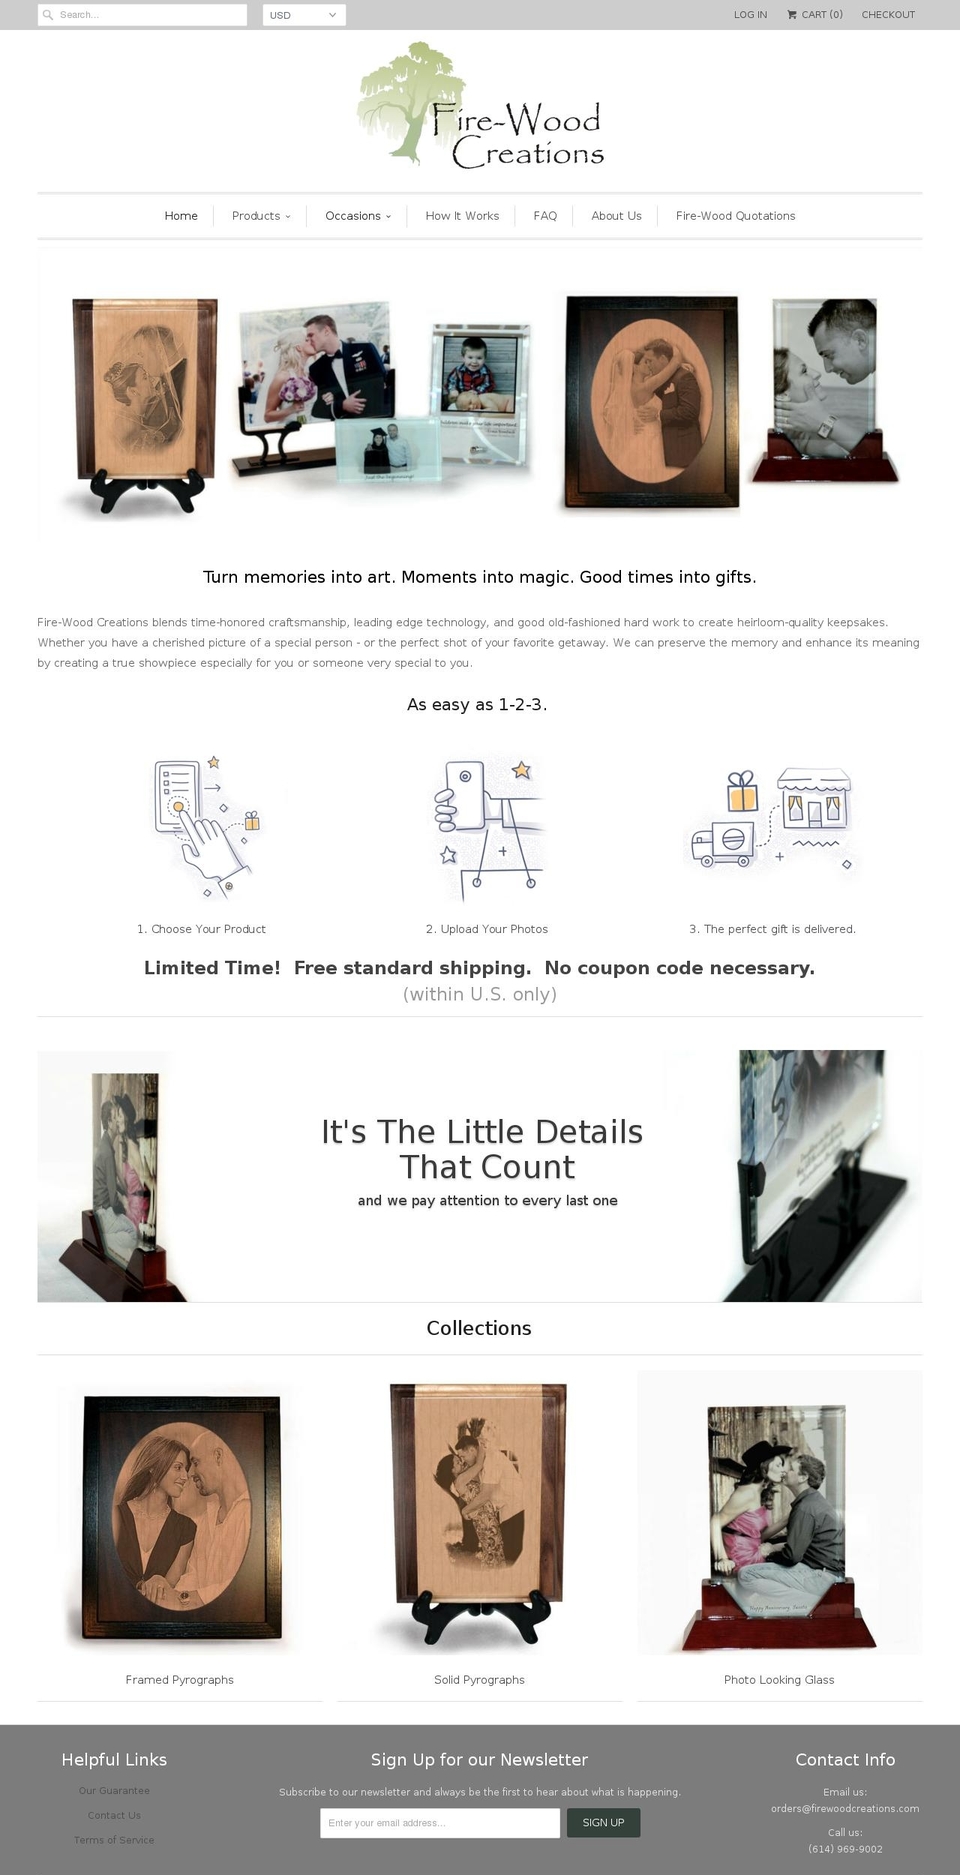 Galleria Shopify theme site example firewoodcreations.com